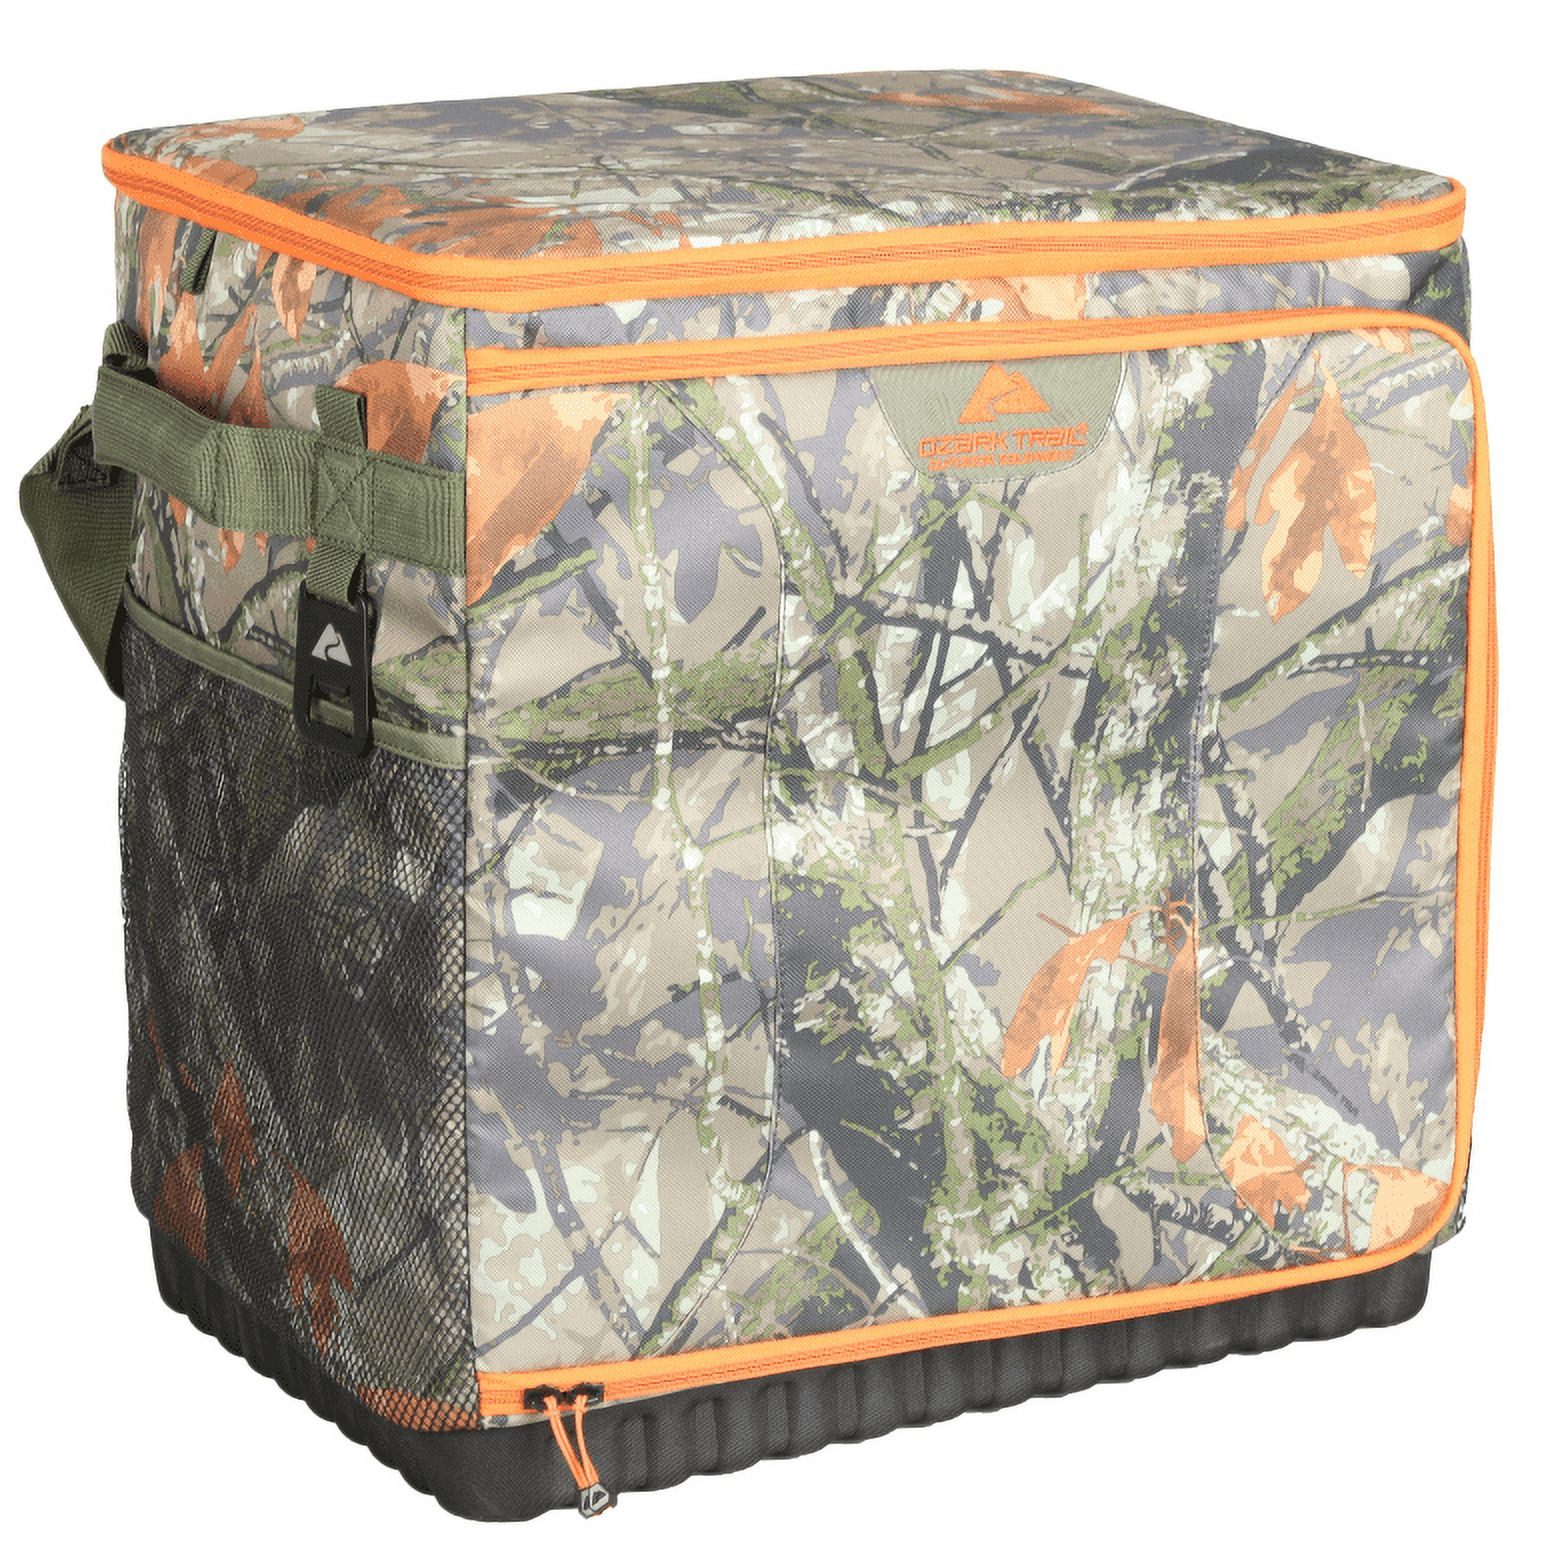 Ozark Trail Crane Lake Deluxe Camp and Outdoor Storage Organizer, Green Camo - image 1 of 10